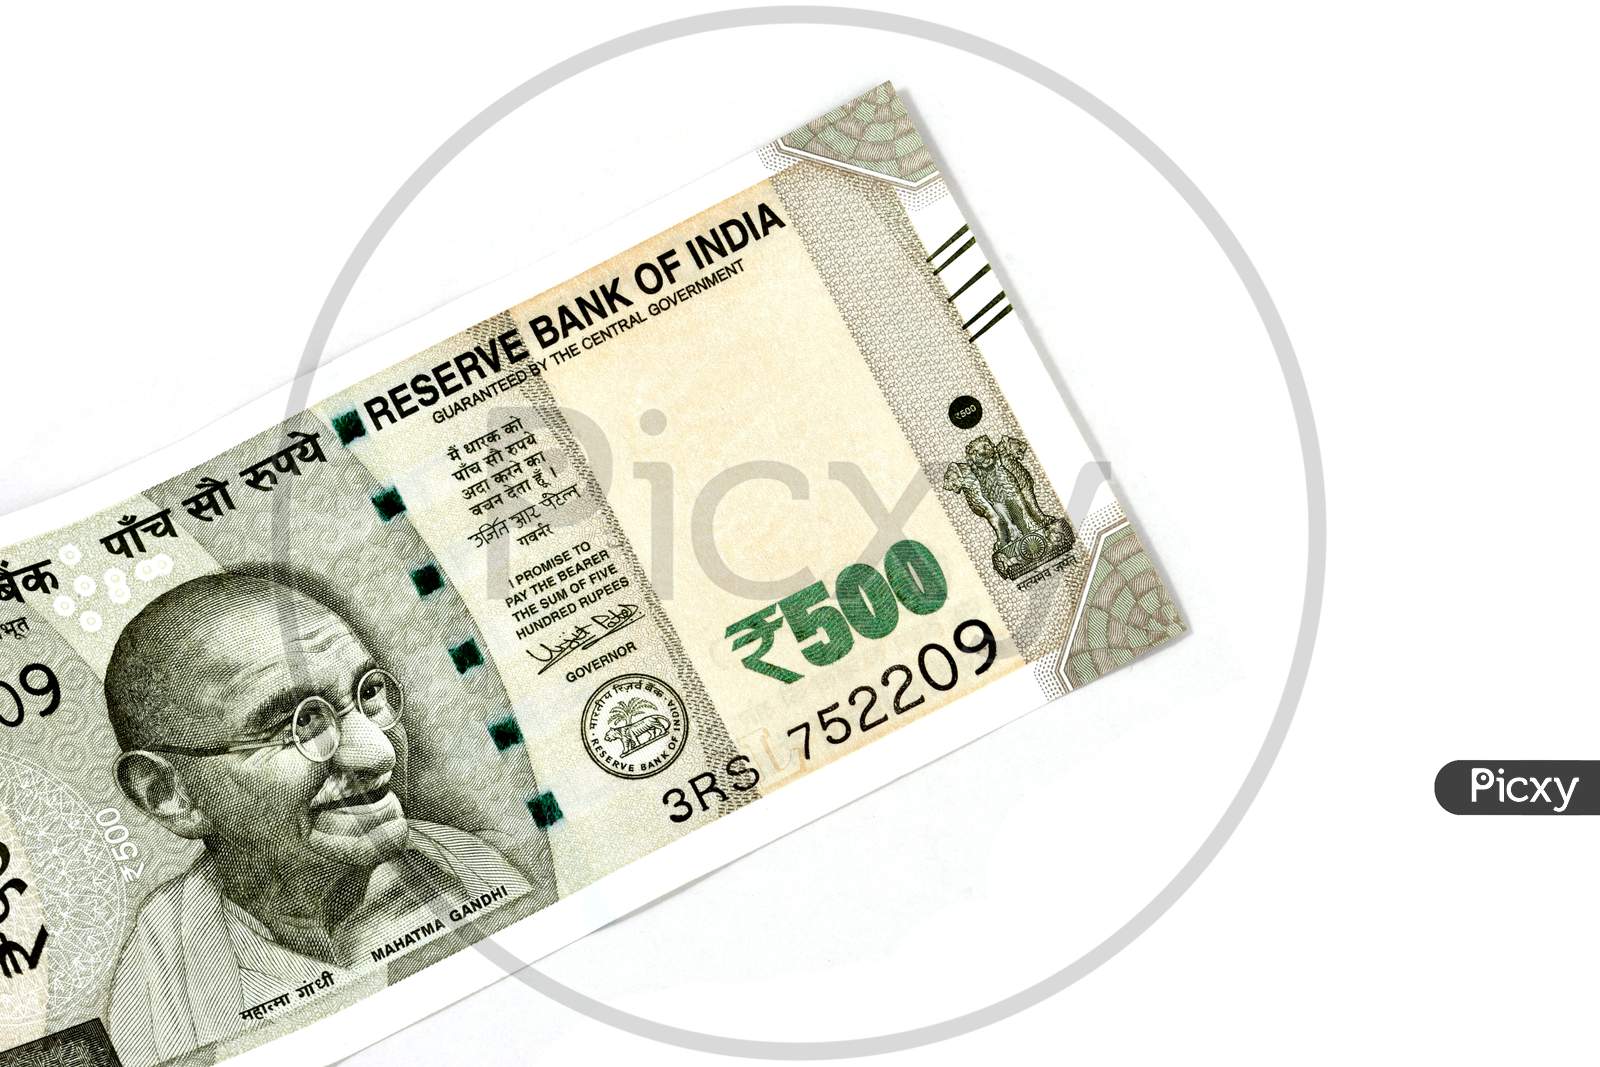 New Indian Currency Of 500 Rupee Note